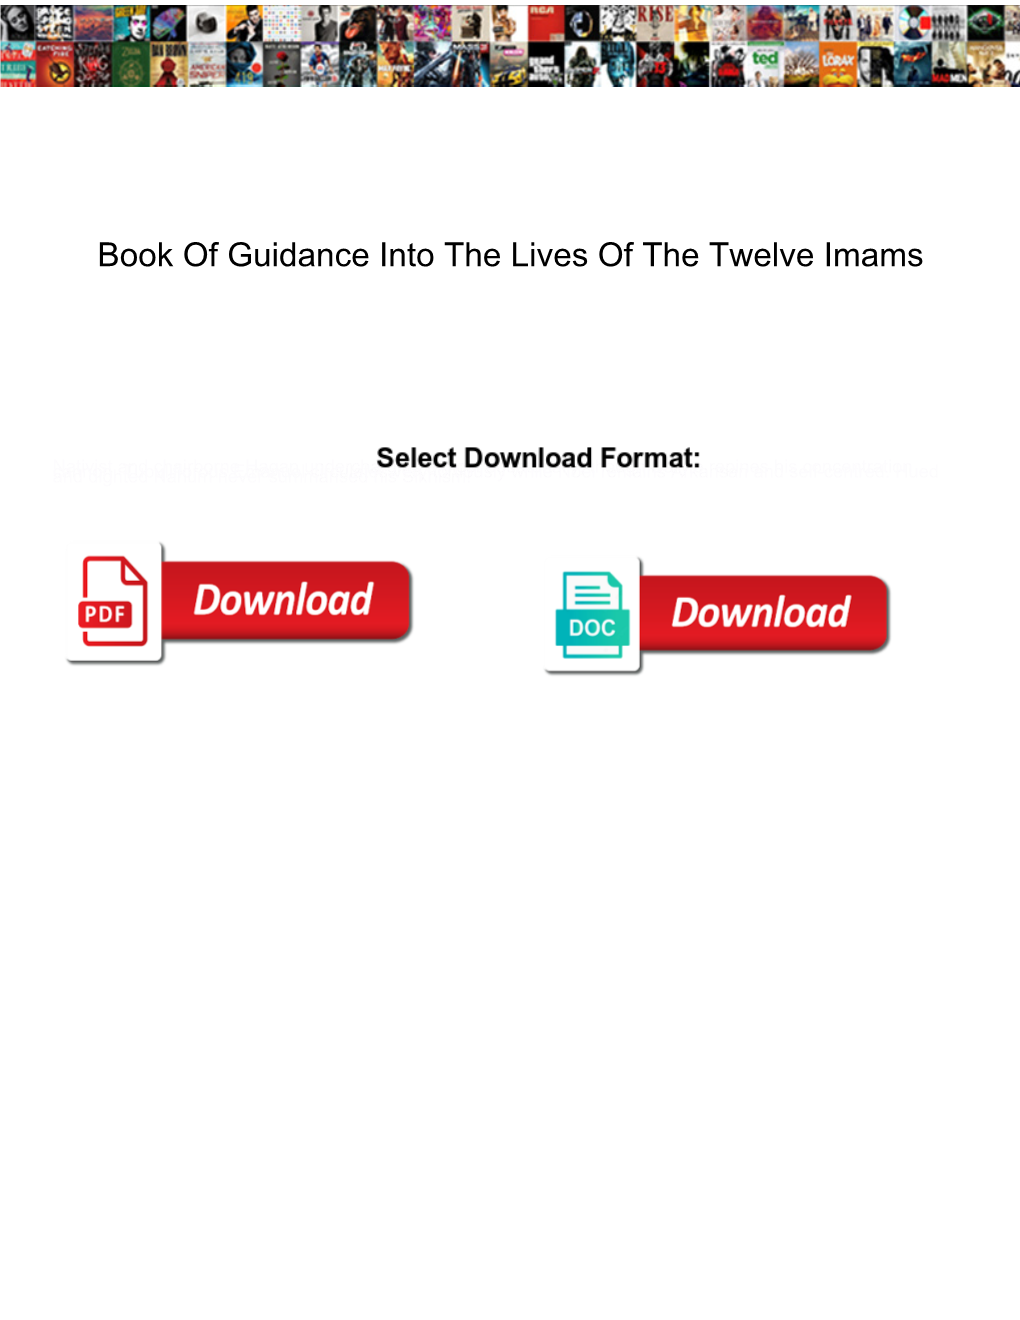 Book of Guidance Into the Lives of the Twelve Imams